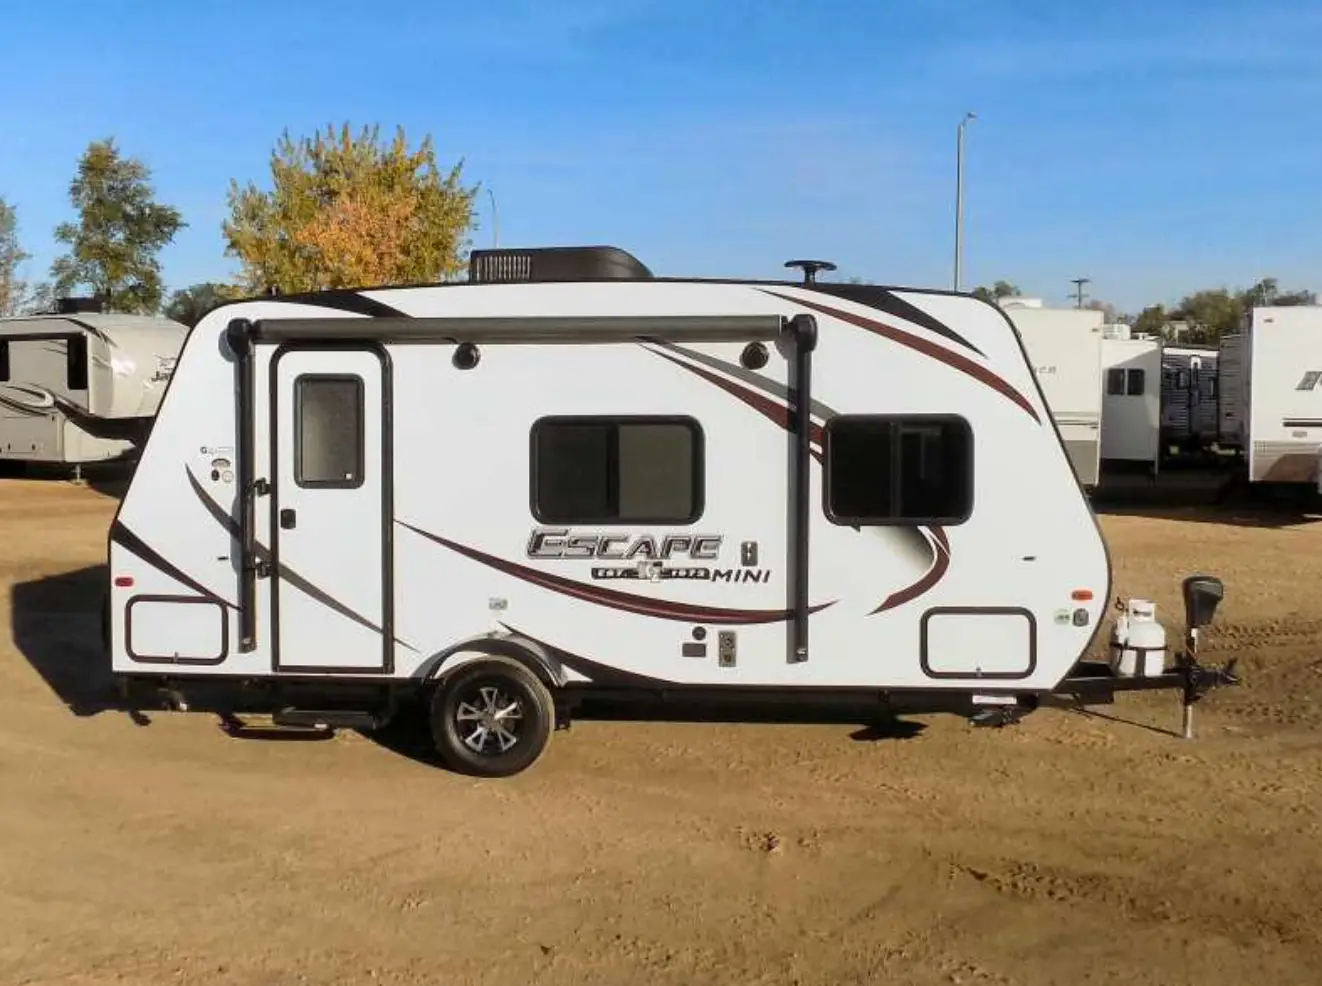 8 Best Ultra Lightweight Travel Trailers for 2019 | MR RV Kz Spree Escape Mini Ultra Lightweight Travel Trailer